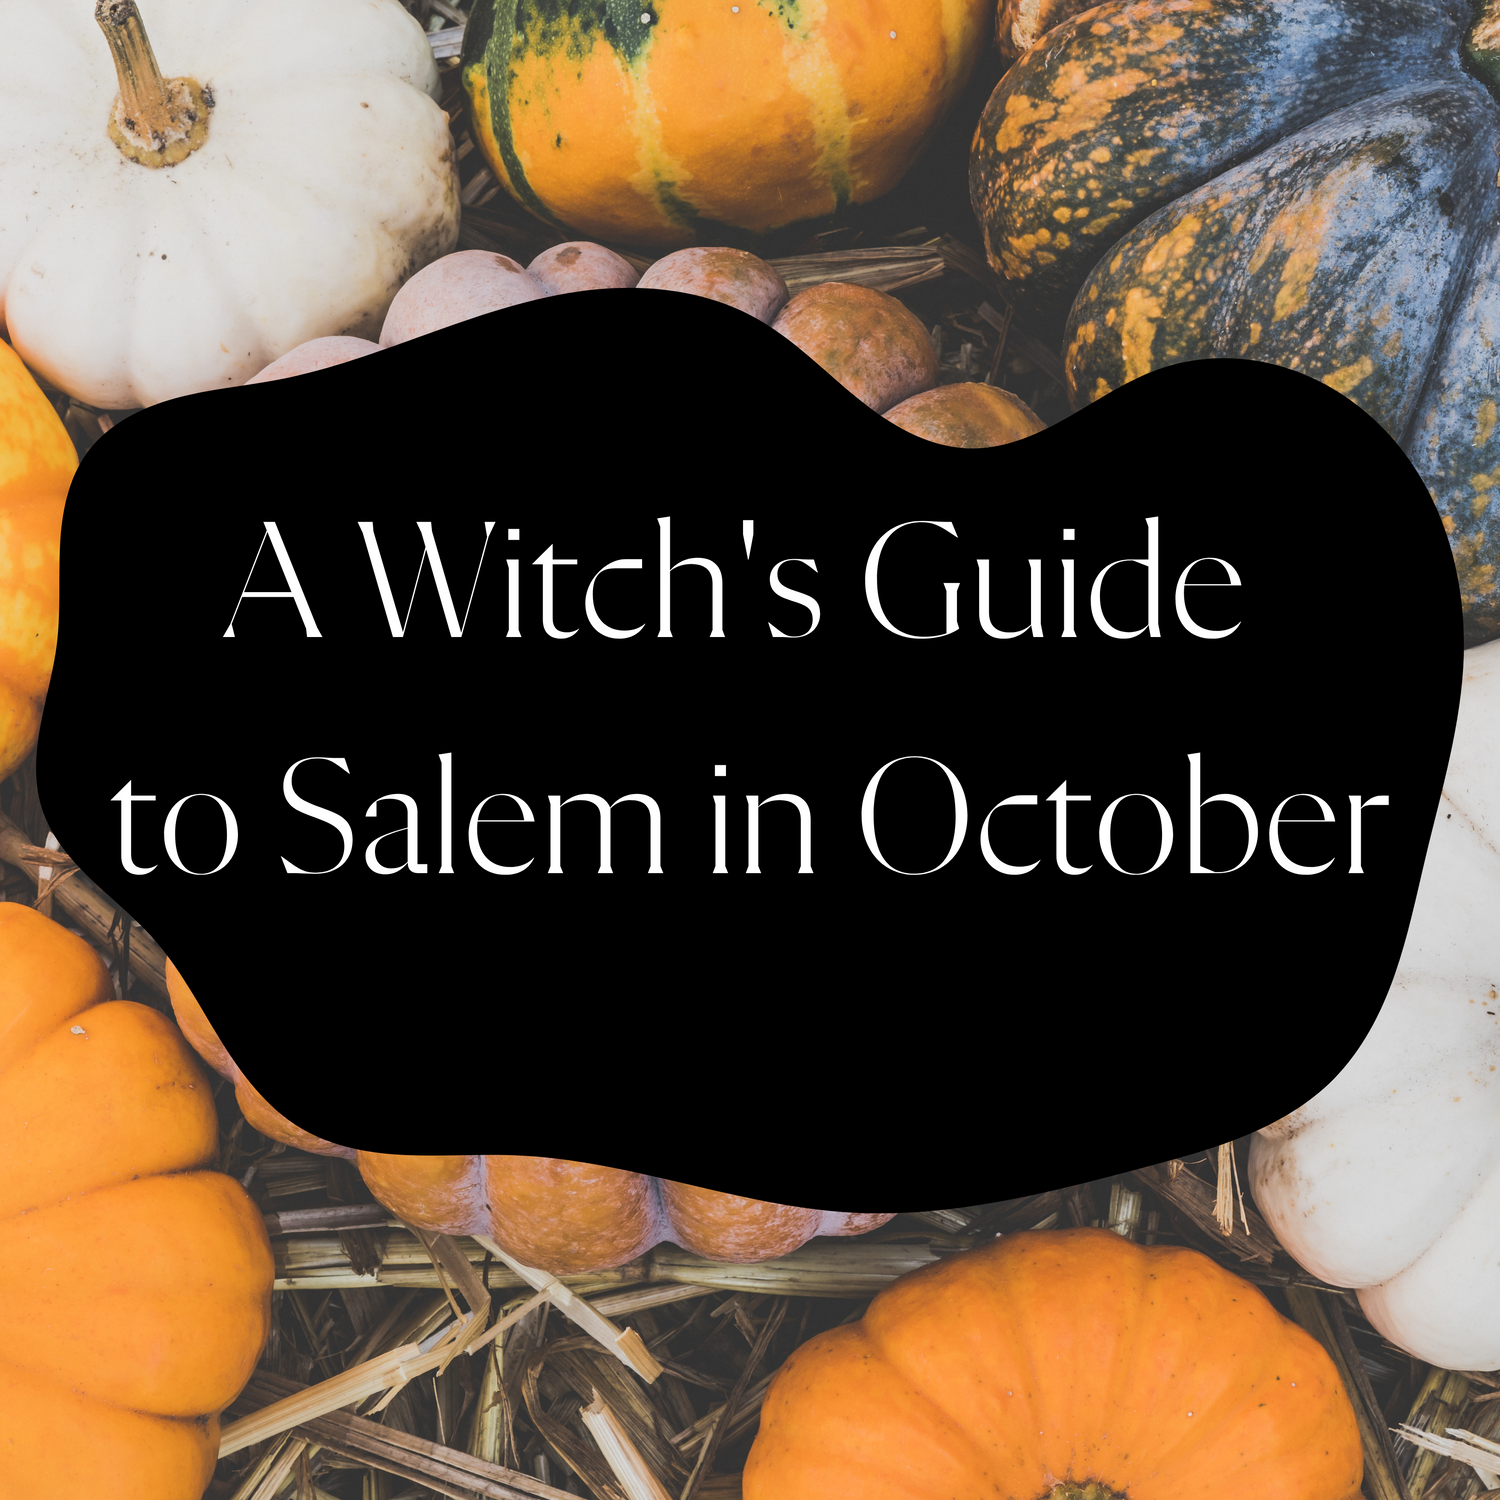 A Witch's Guide to Salem in October